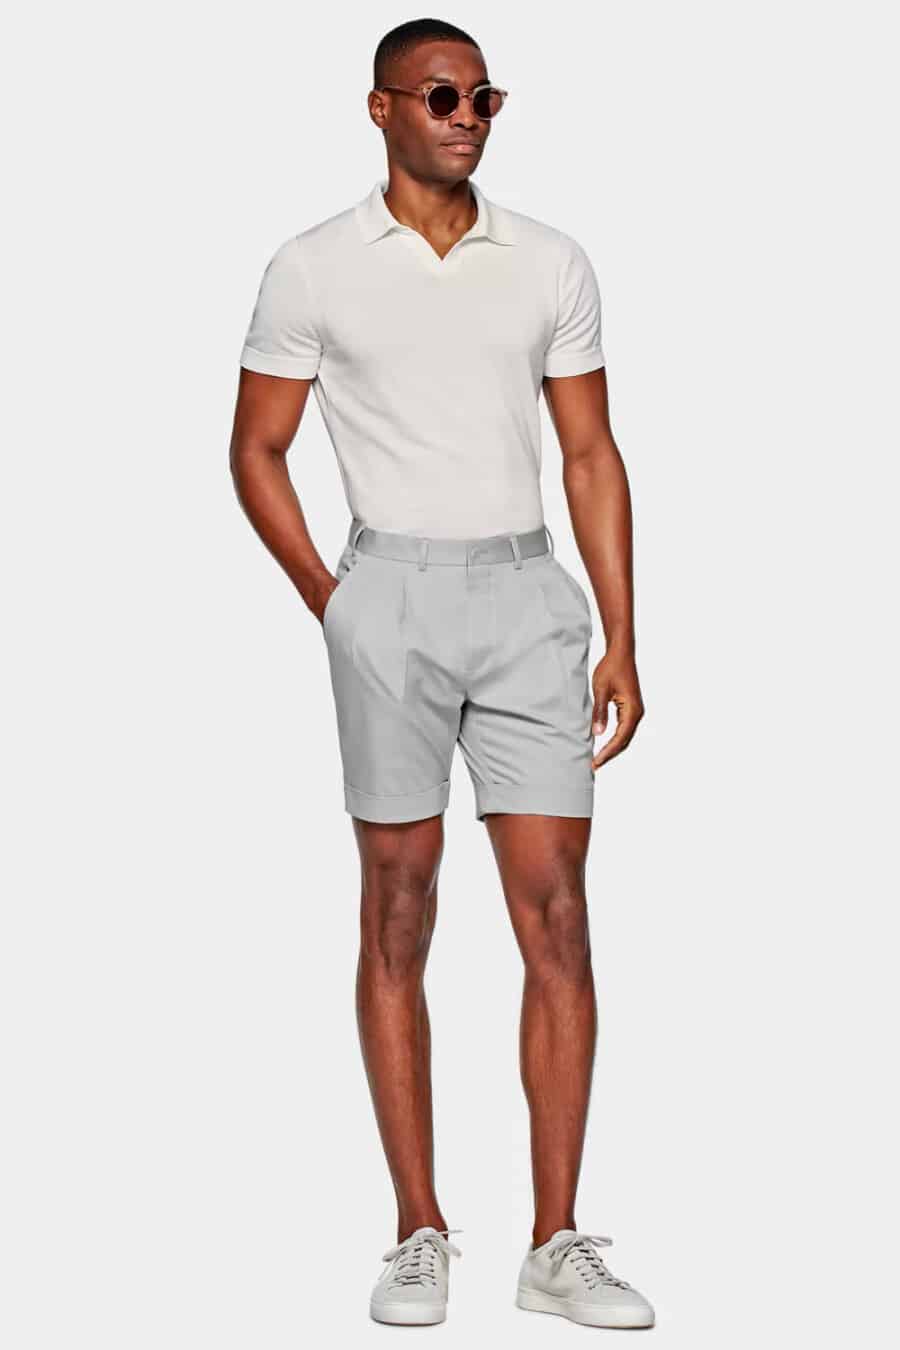 Men's light grey tailored shorts with white knitted polo shirt tucked in with light grey sneakers outfit